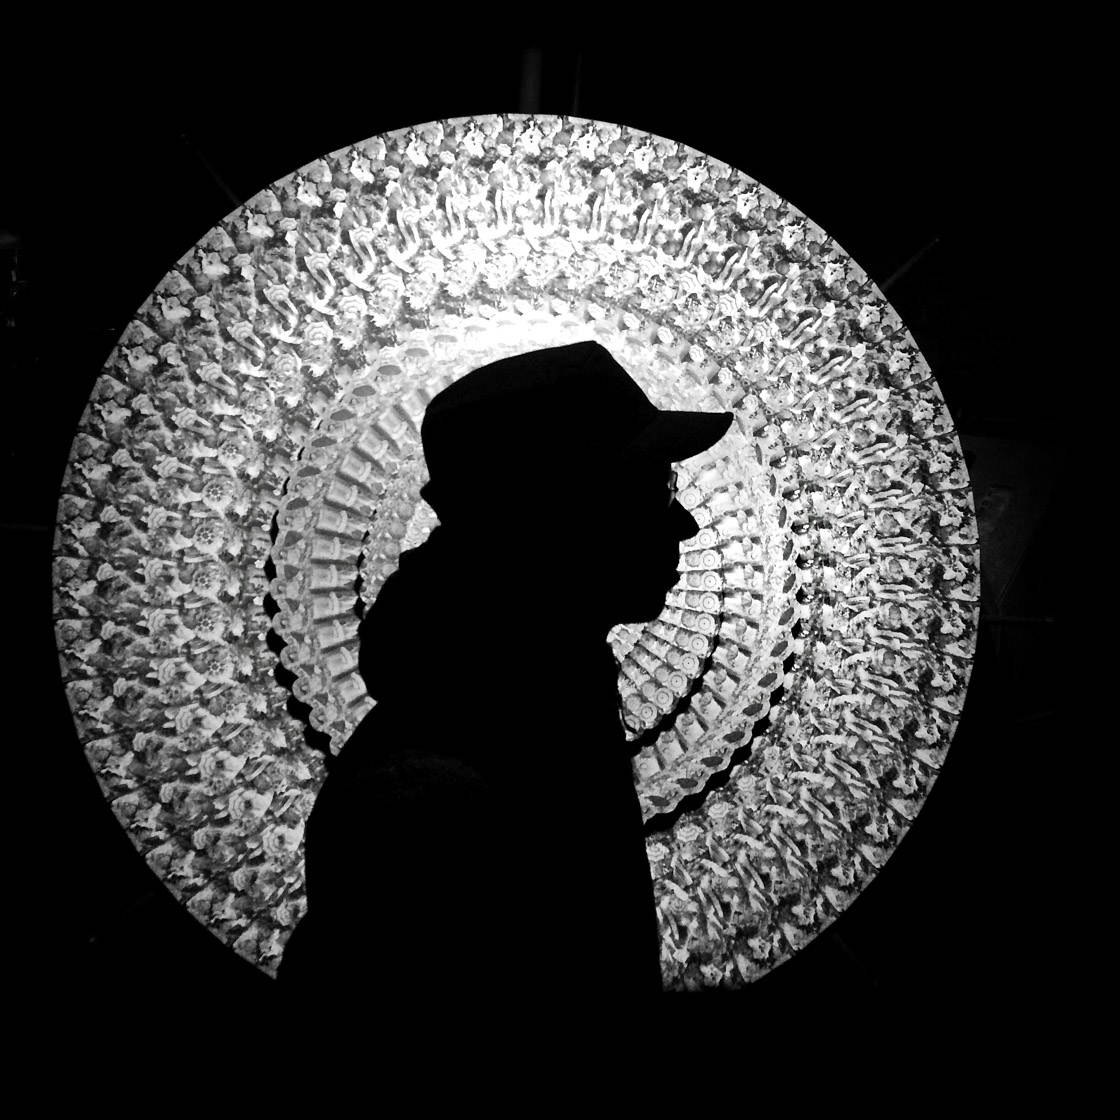 Black and white silhouette photography 29